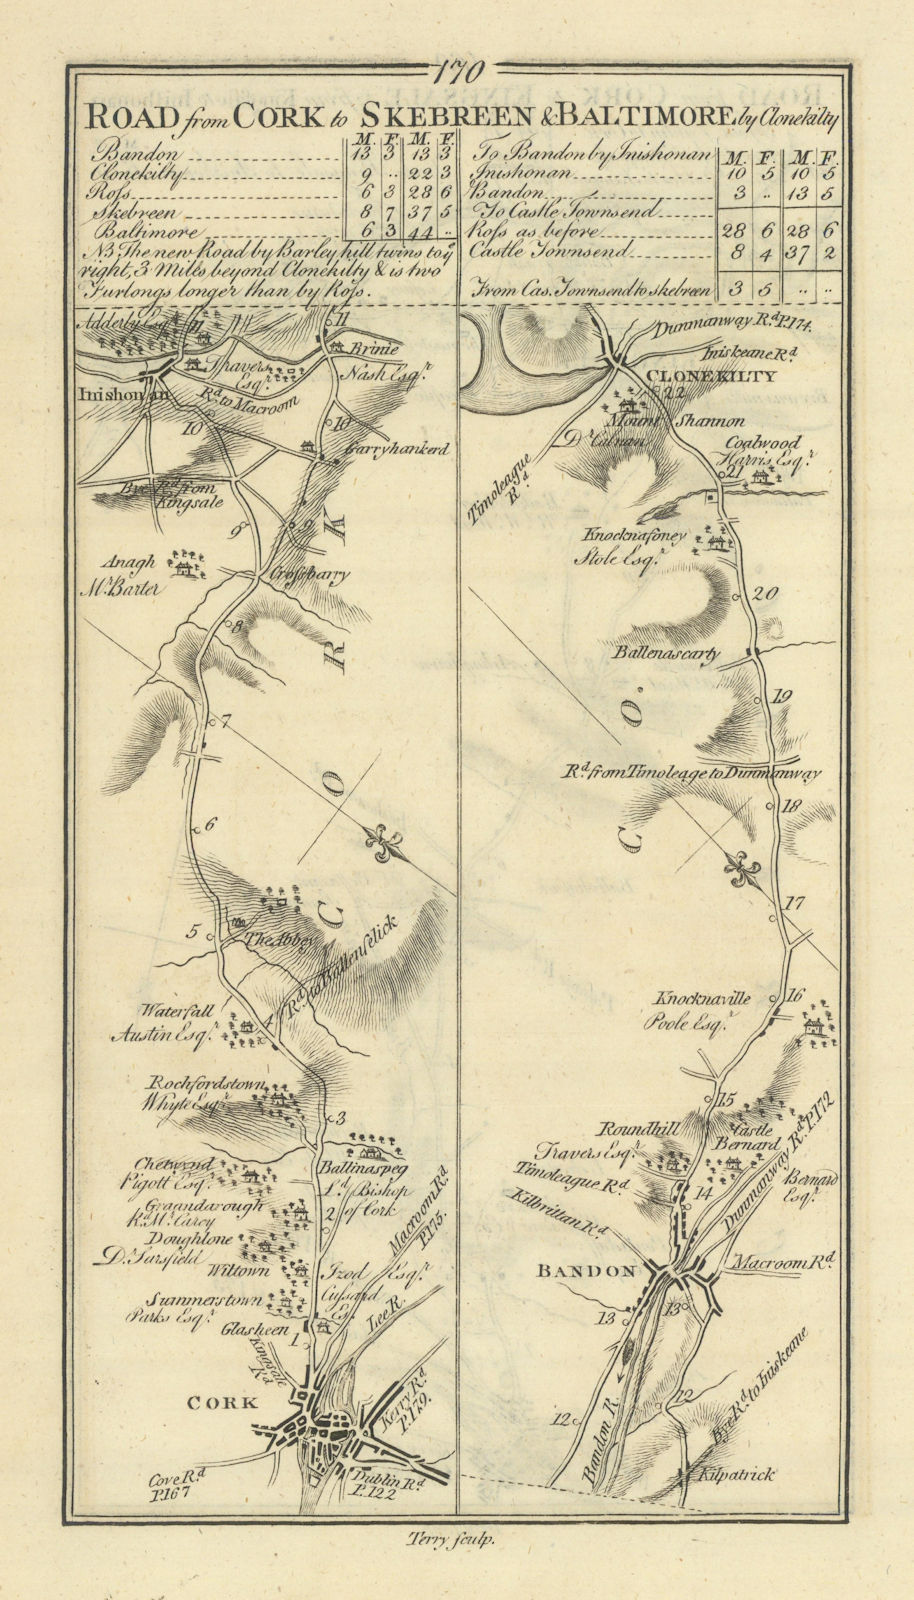 Associate Product #170 Cork to Skebreen… by Clonakilty. Bandon Innishannon TAYLOR/SKINNER 1778 map